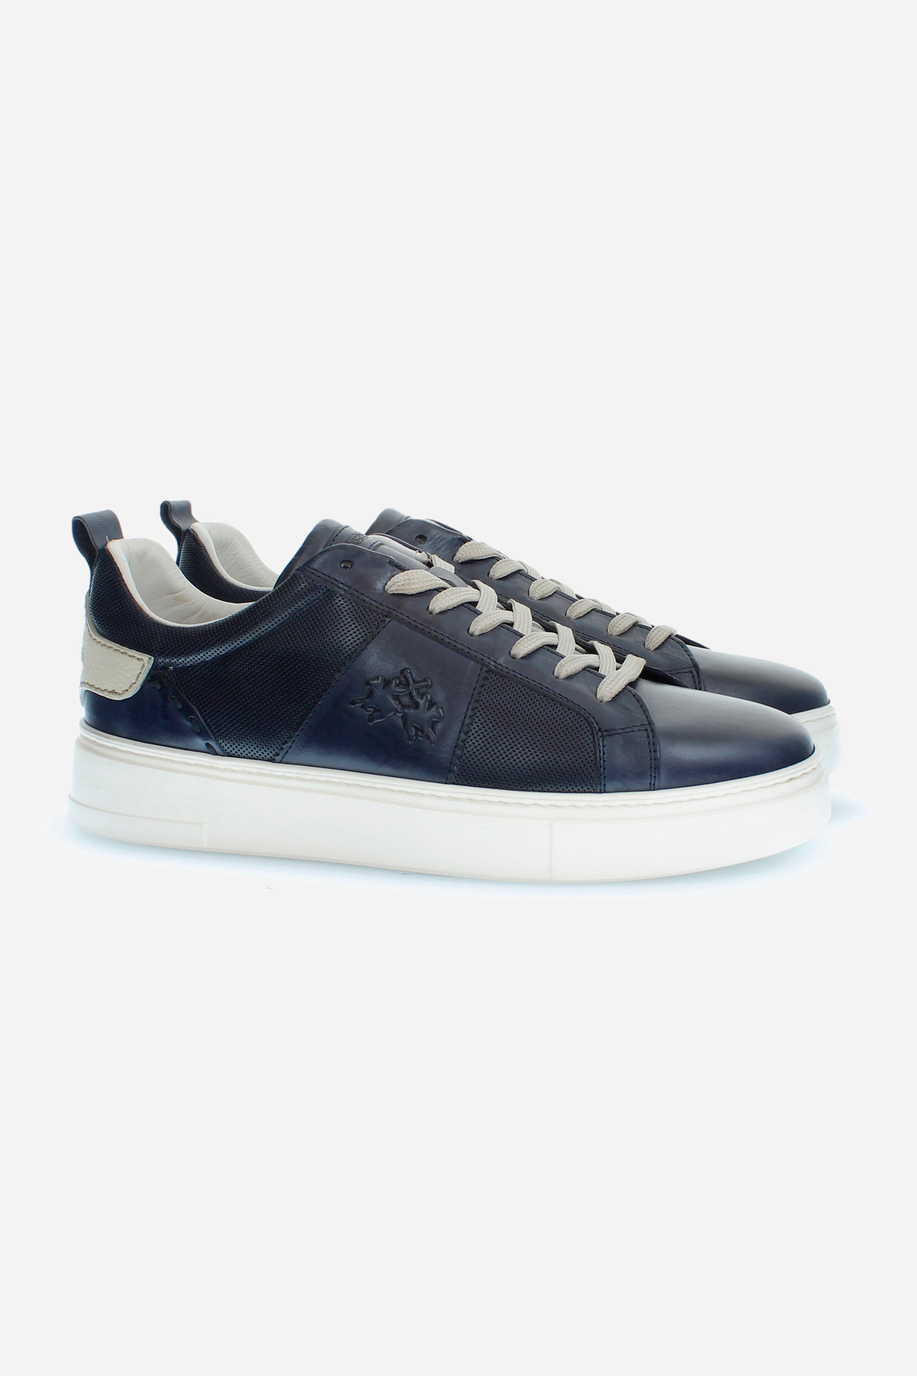 Men's leather trainers with contrasting inserts - Man shoes | La Martina - Official Online Shop